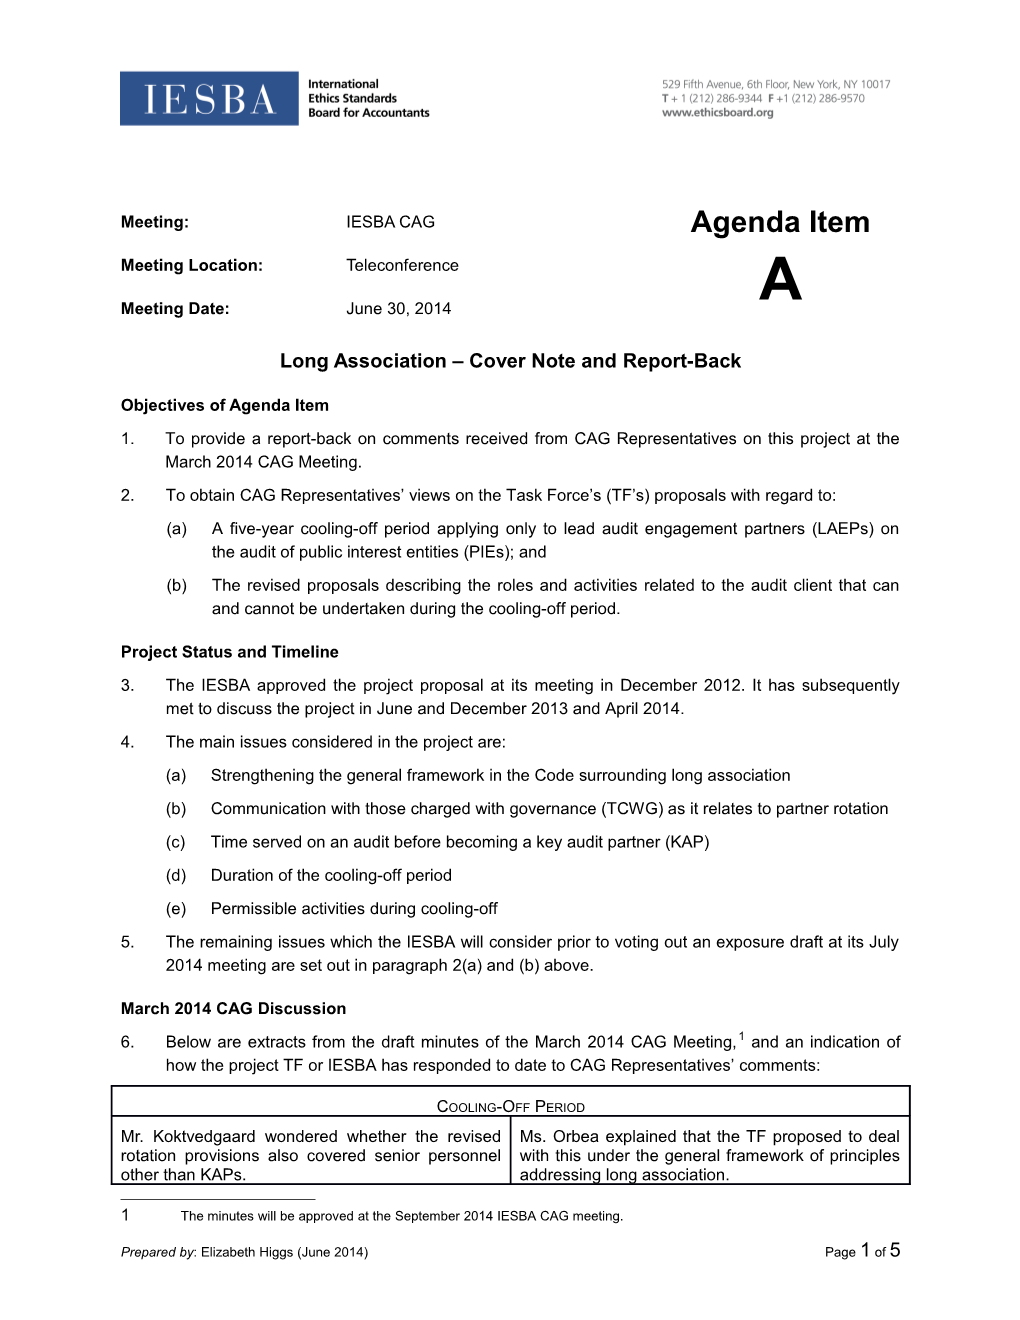 Long Association Cover Note and Report-Back